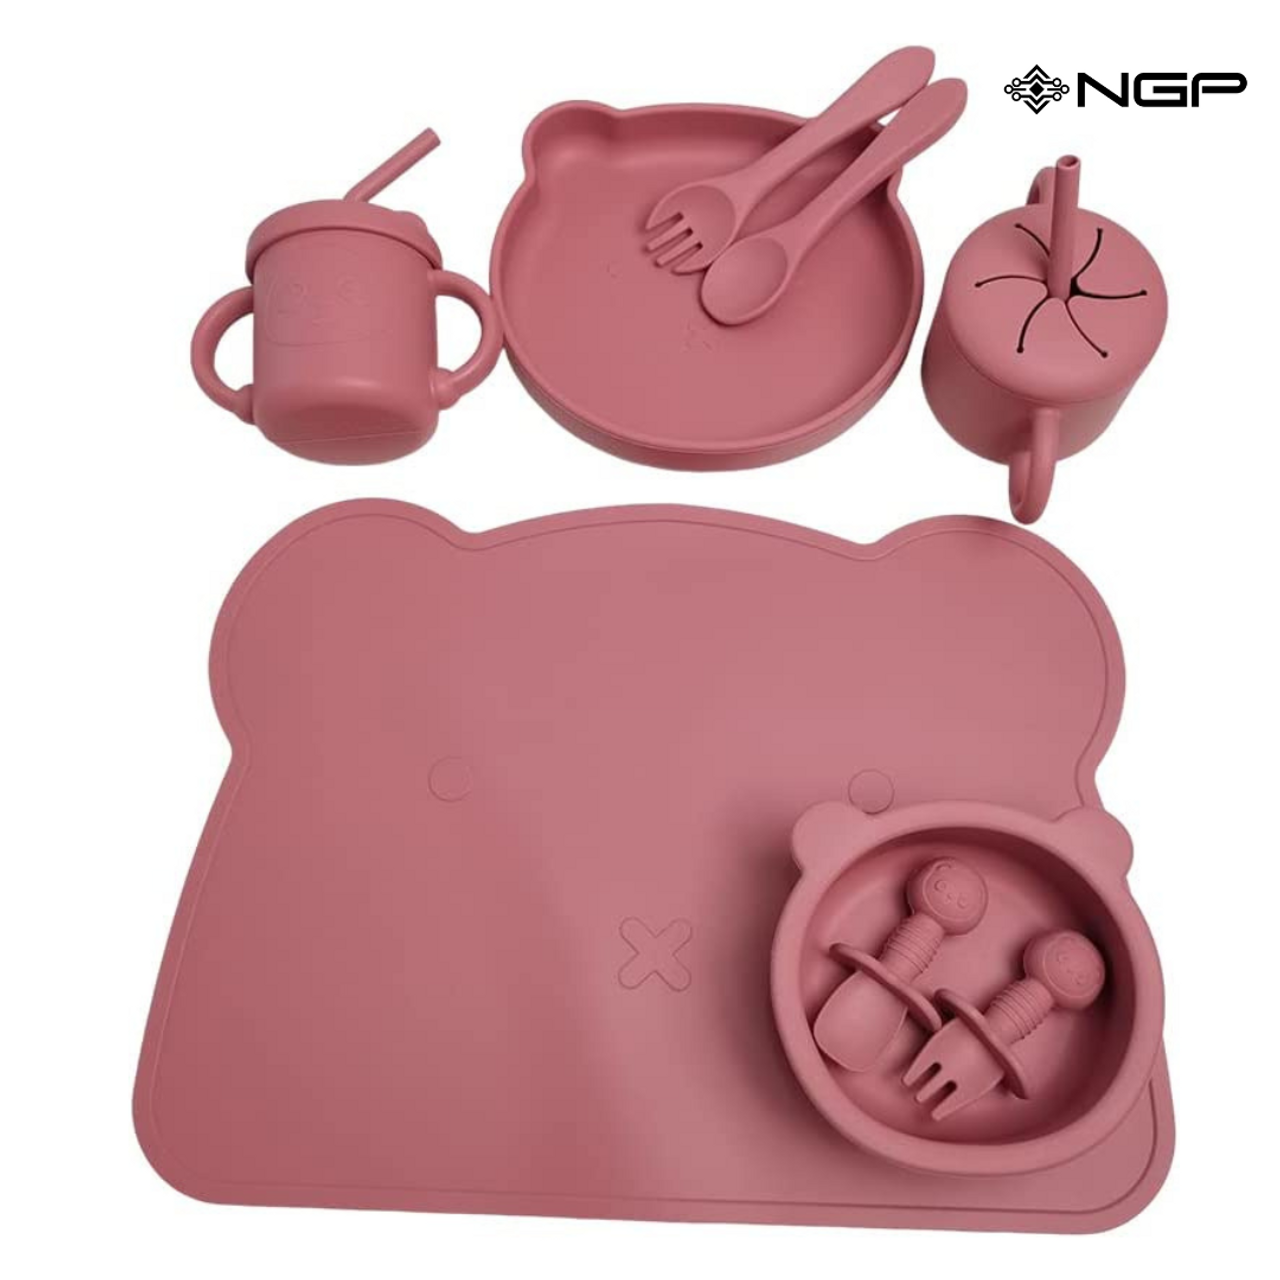 Pink Baby Feeding Set – Baby Feeding Supplies Set with Bib, Sippy Cup,  First Stage Toddler Utensils, Suction Bowl, Divided Plate, Baby Spoon and  Fork